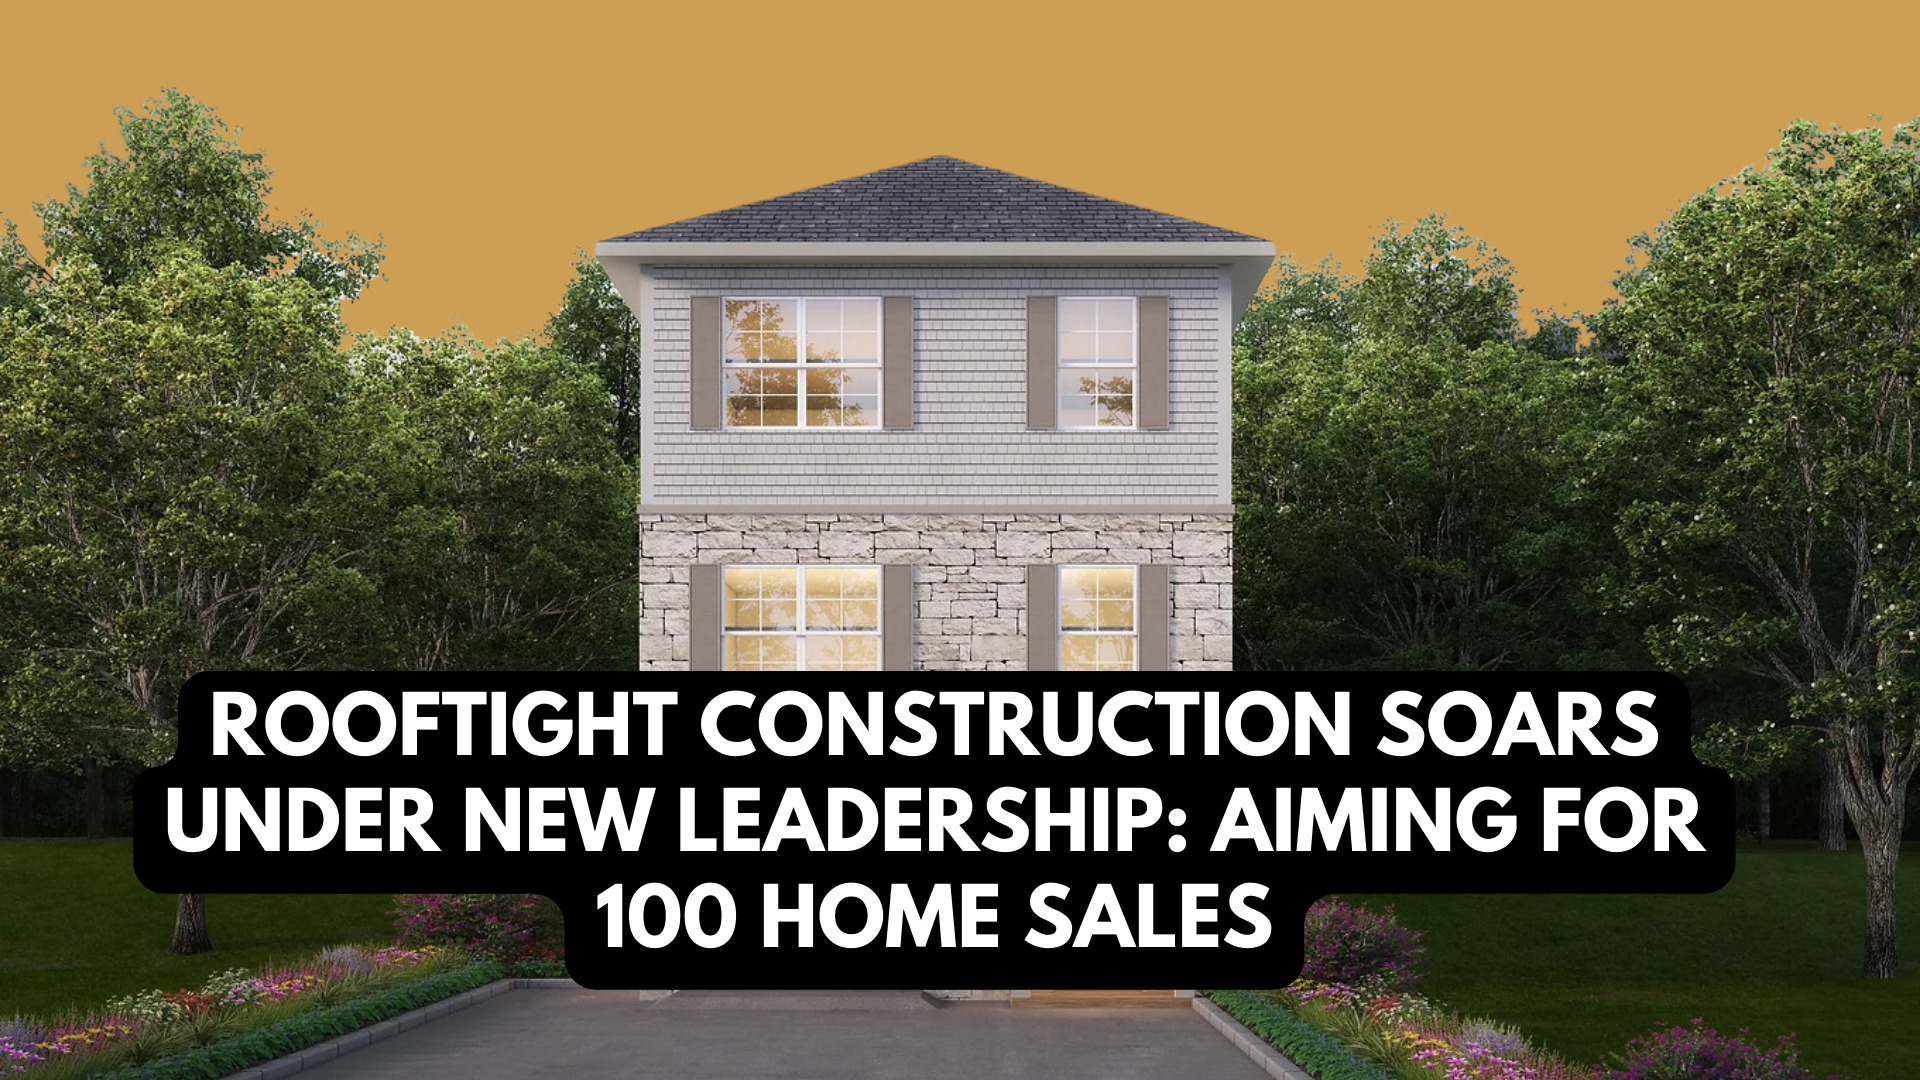 Rooftight Construction Soars Under New Leadership: Aiming for 100 Home Sales